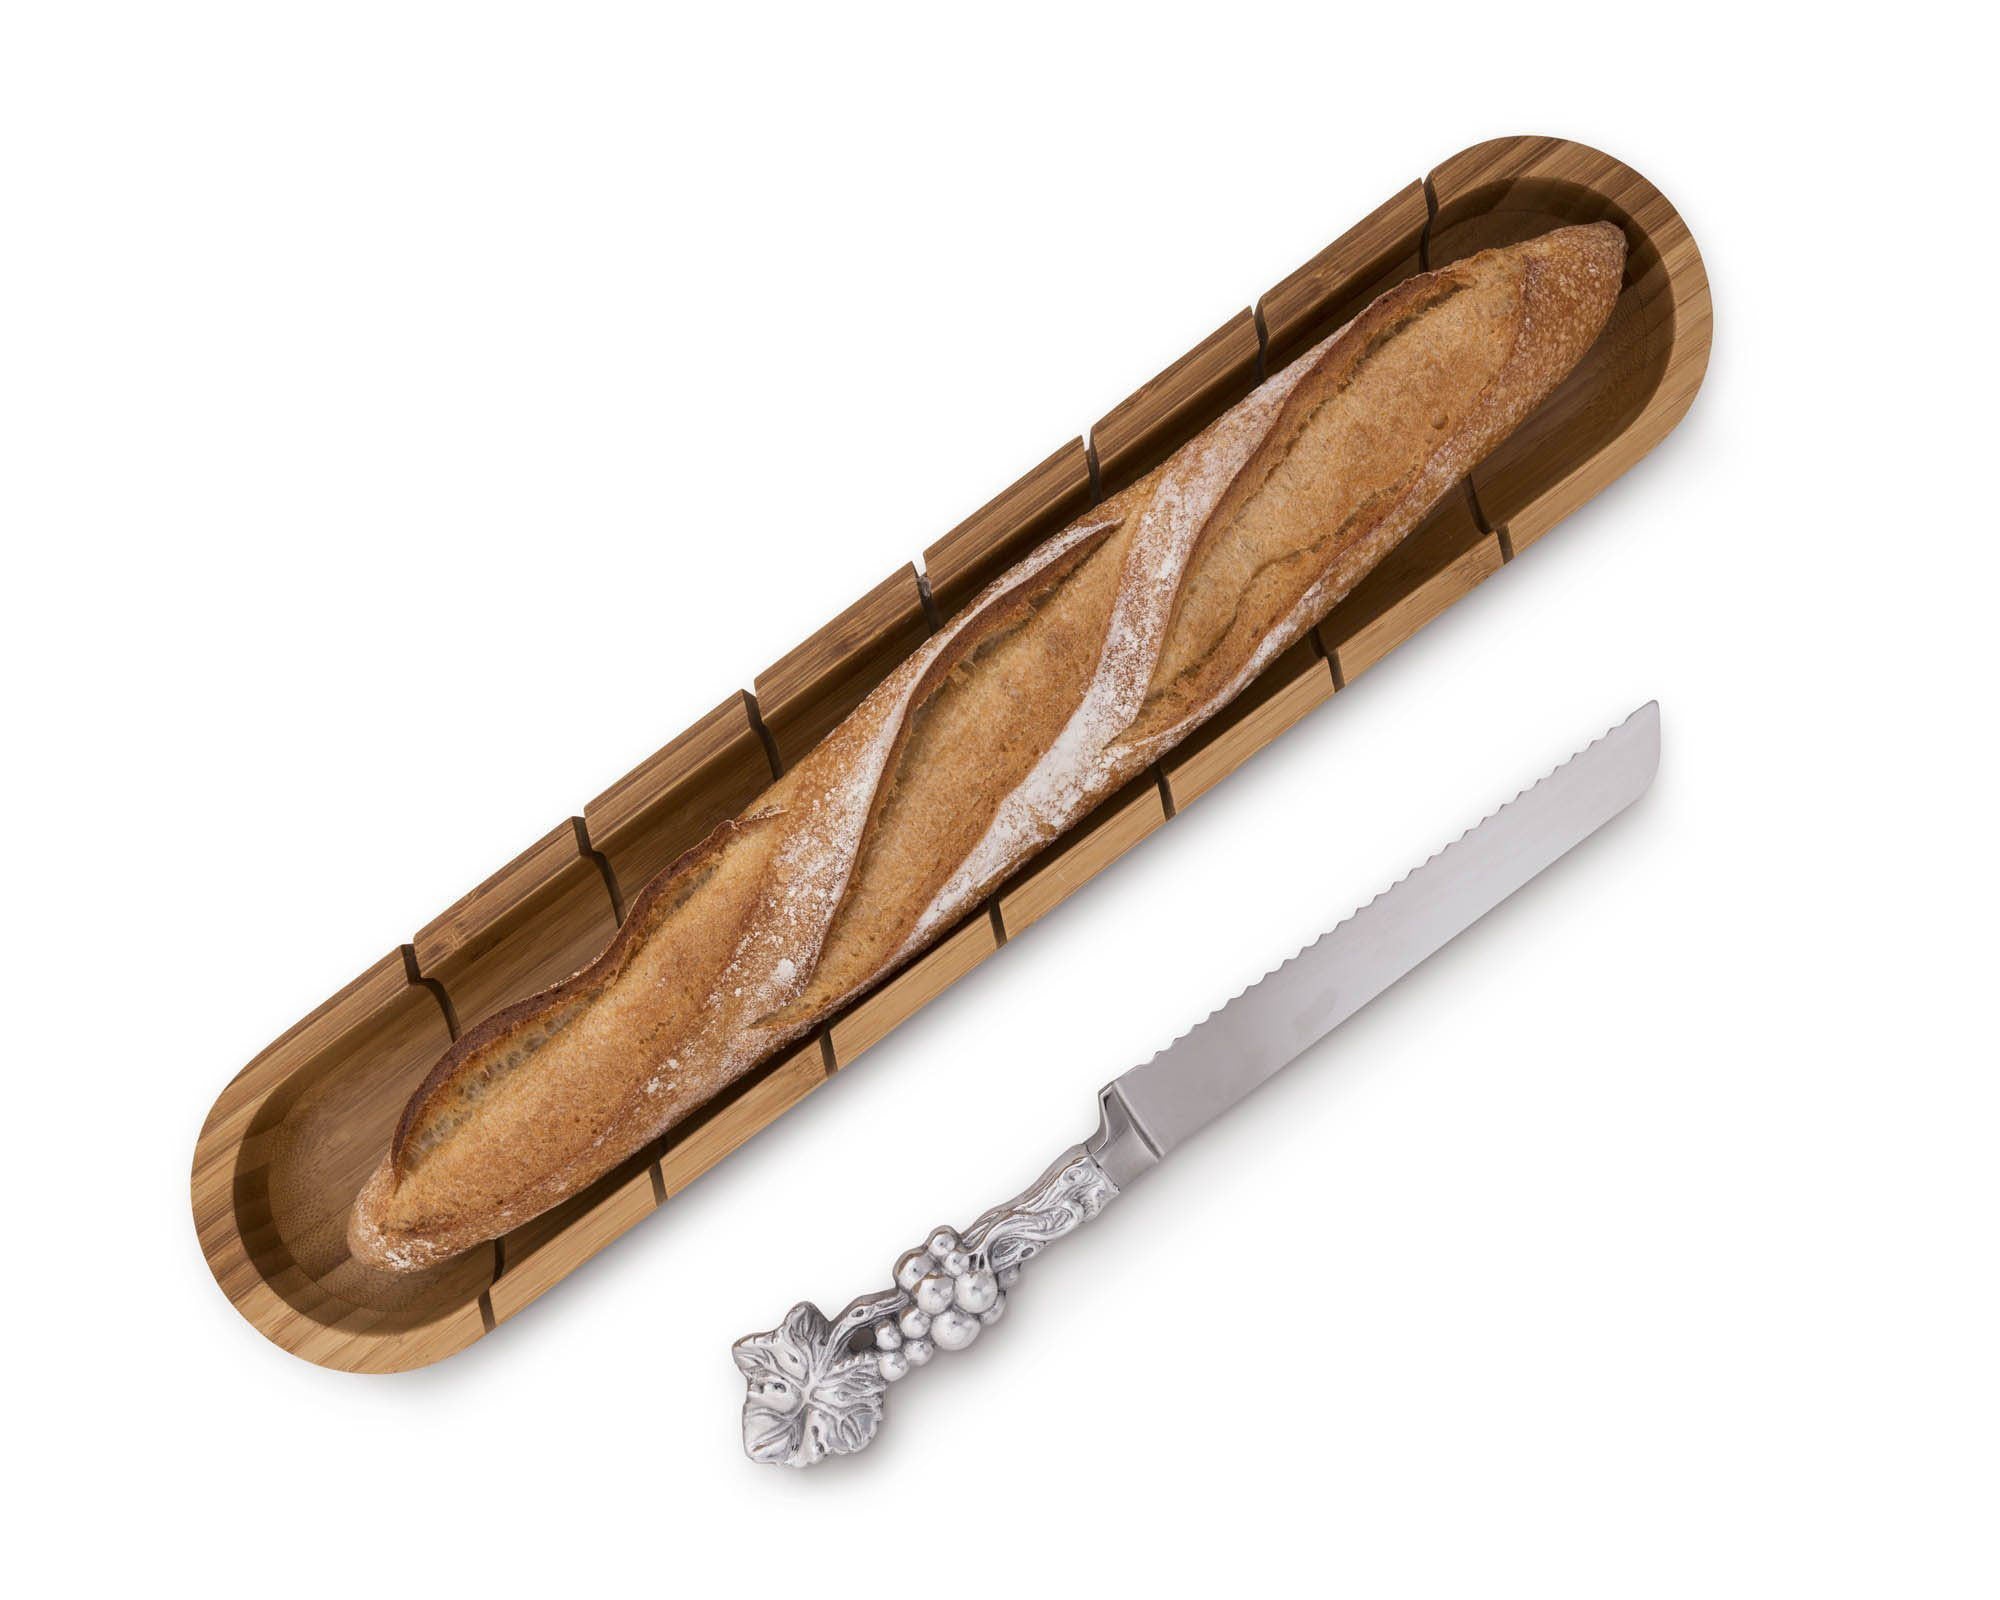 Arthur Court Baguette Board with Grape Bread Knife Product Image